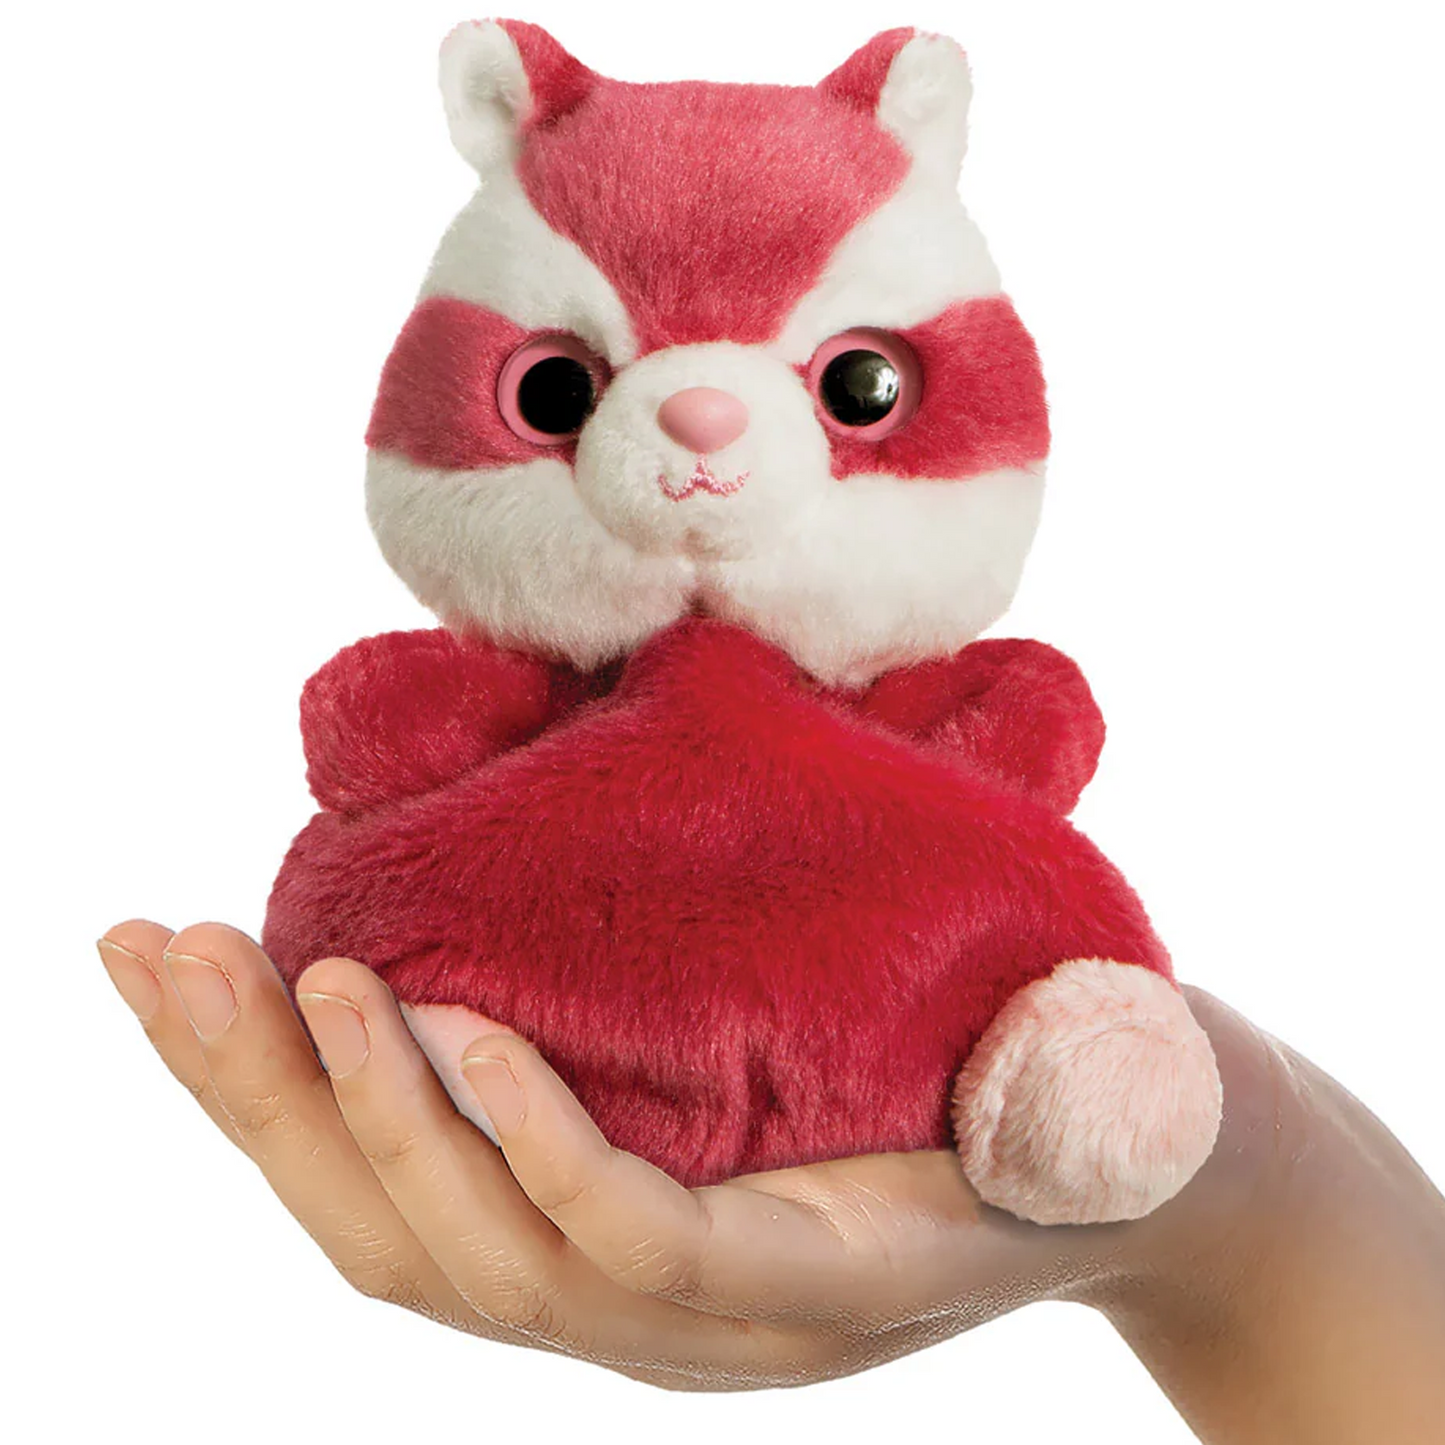 Chewoo the Red Squirrel - Palm Pal Plushie Stuffed Animal Soft Toy (In a Hand) | Happy Piranha